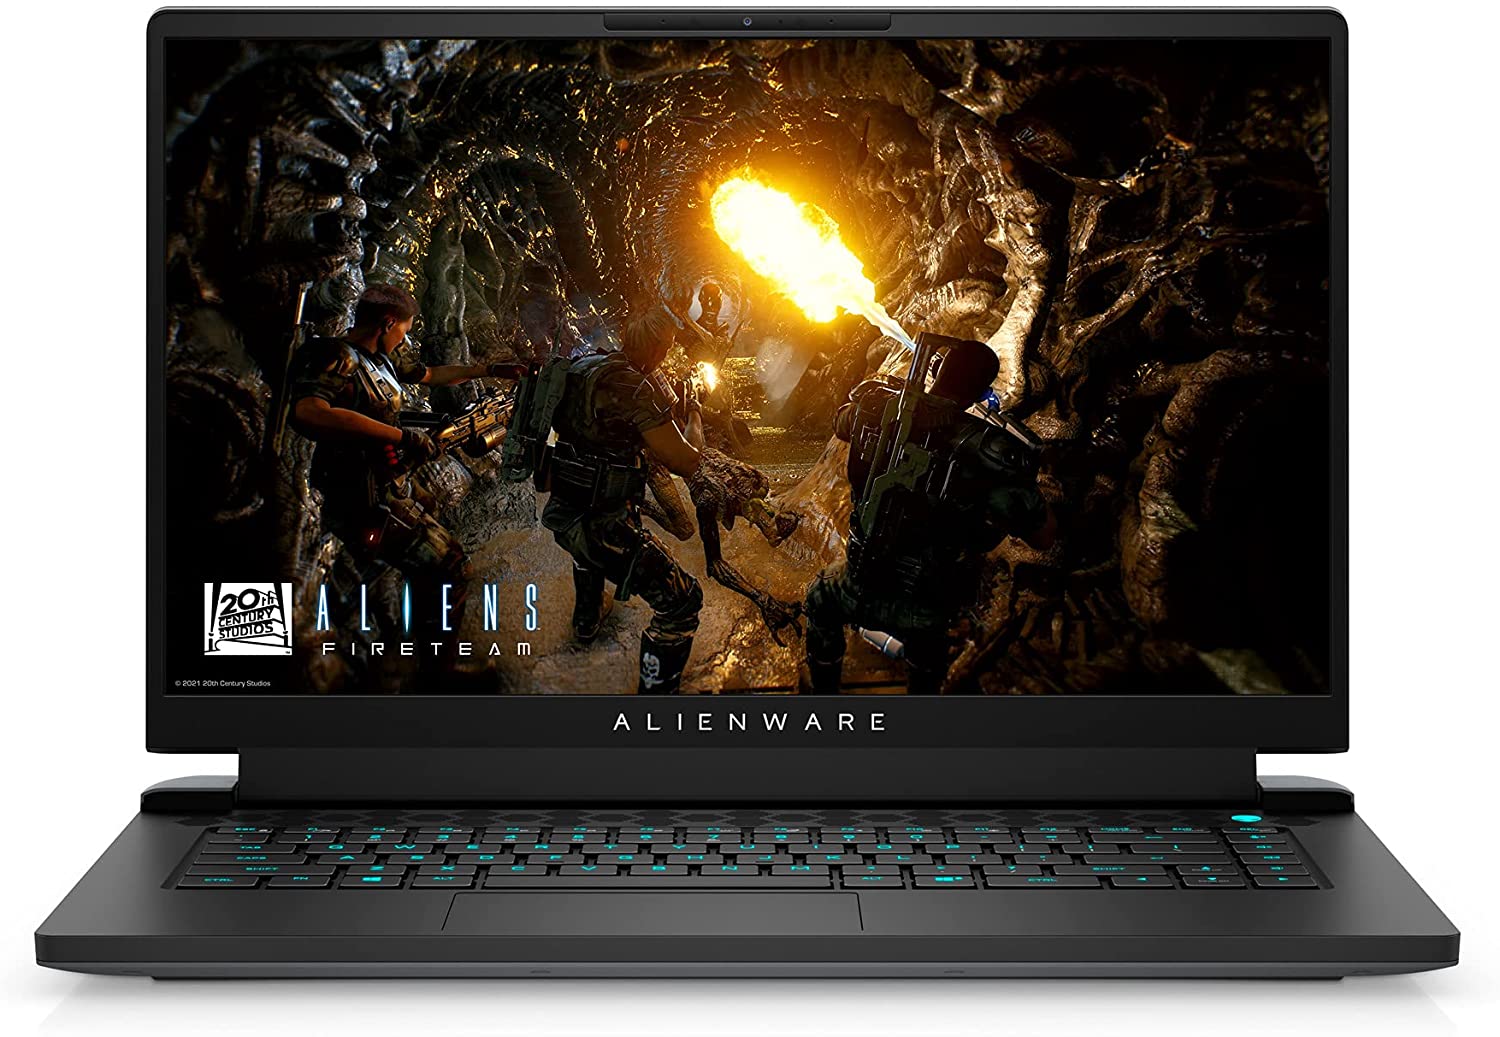 How This Alienware Gaming Laptop is Changing the PC Gaming Industry